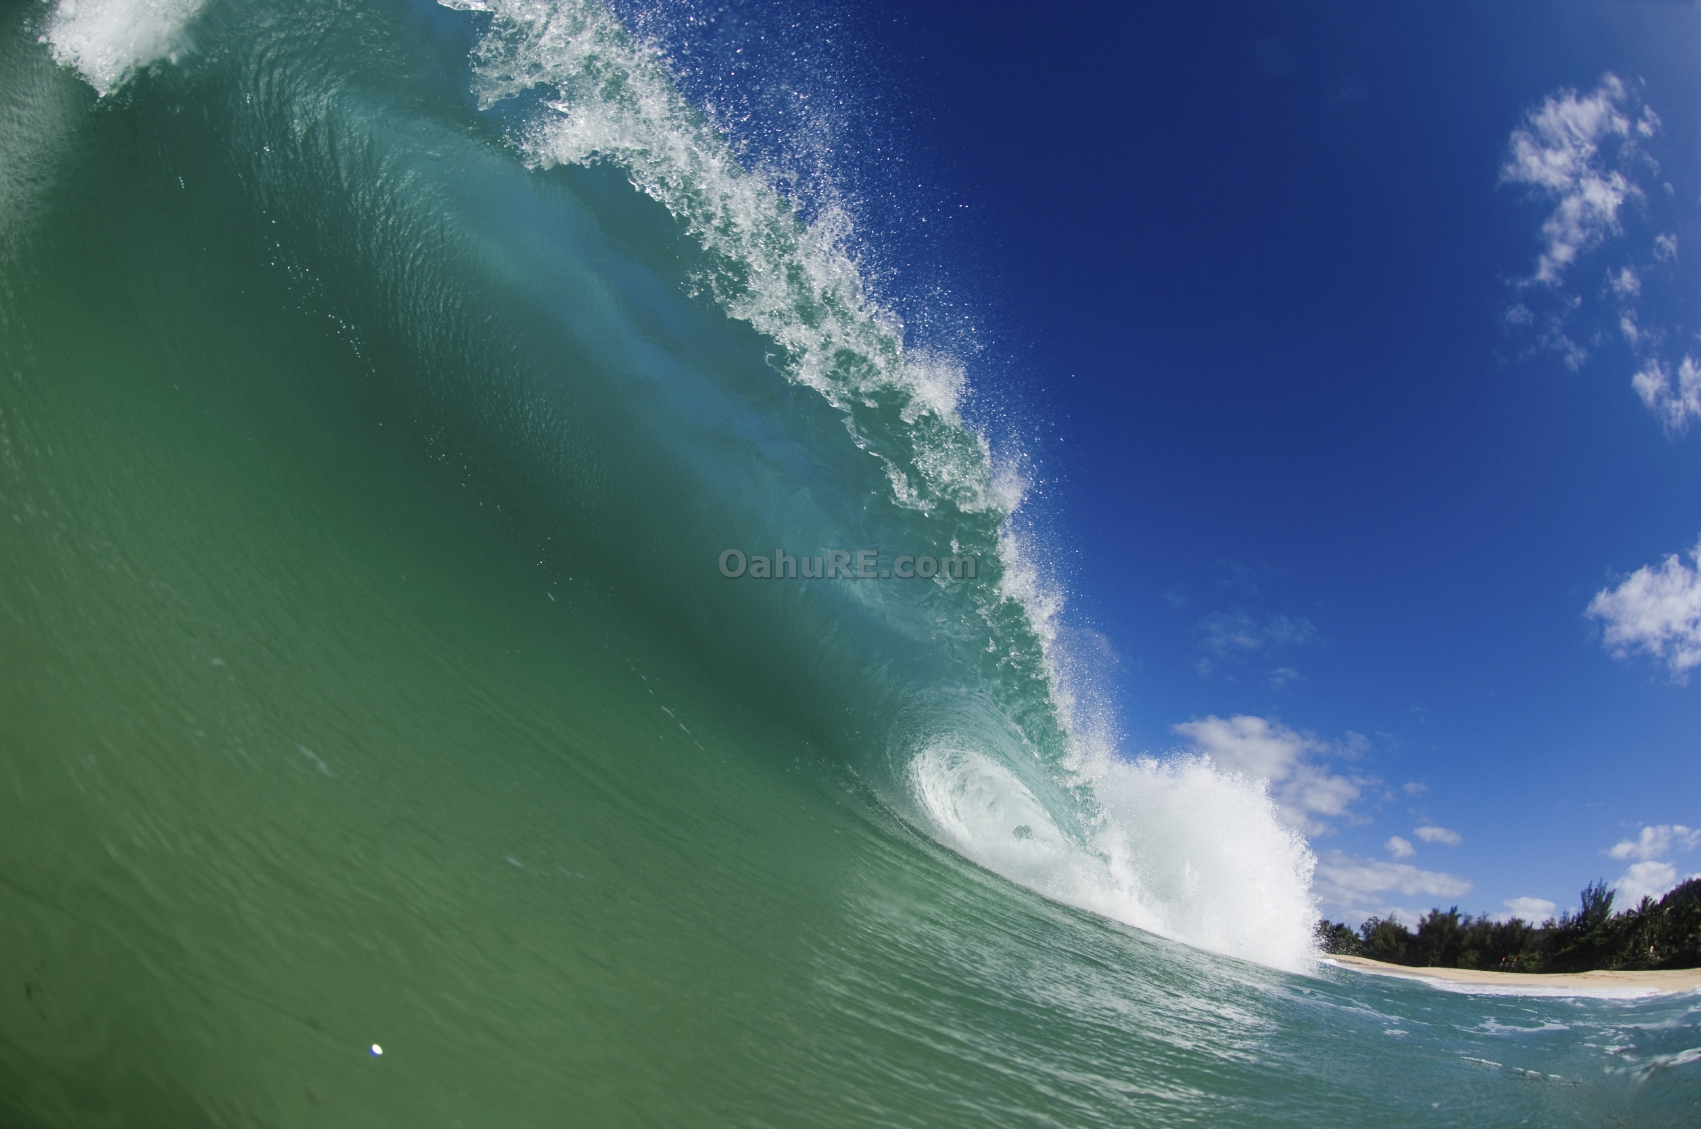 Classic Wave on the shore of Oahu